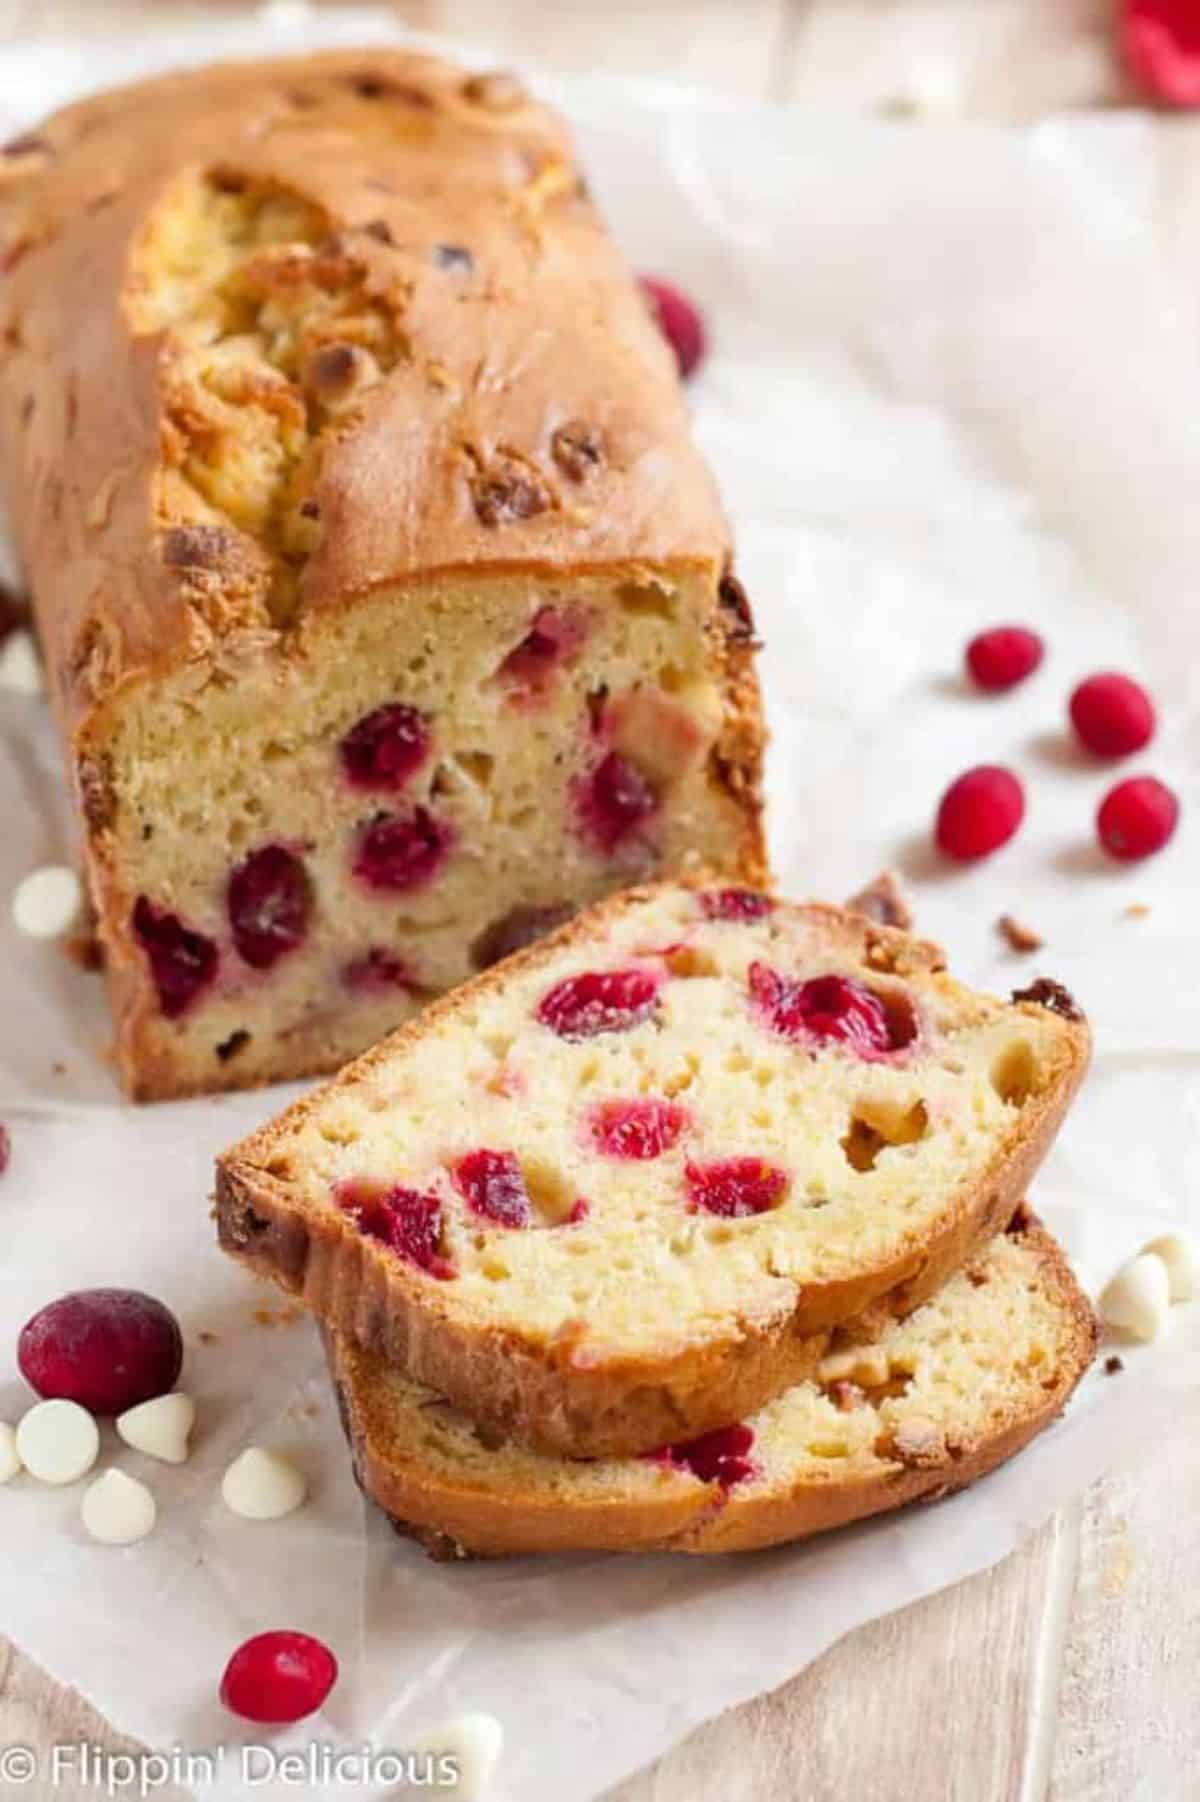 Gluten-Free Cranberry Bread with Orange, White chocolate, and Hazelnuts partially sliced on a table.